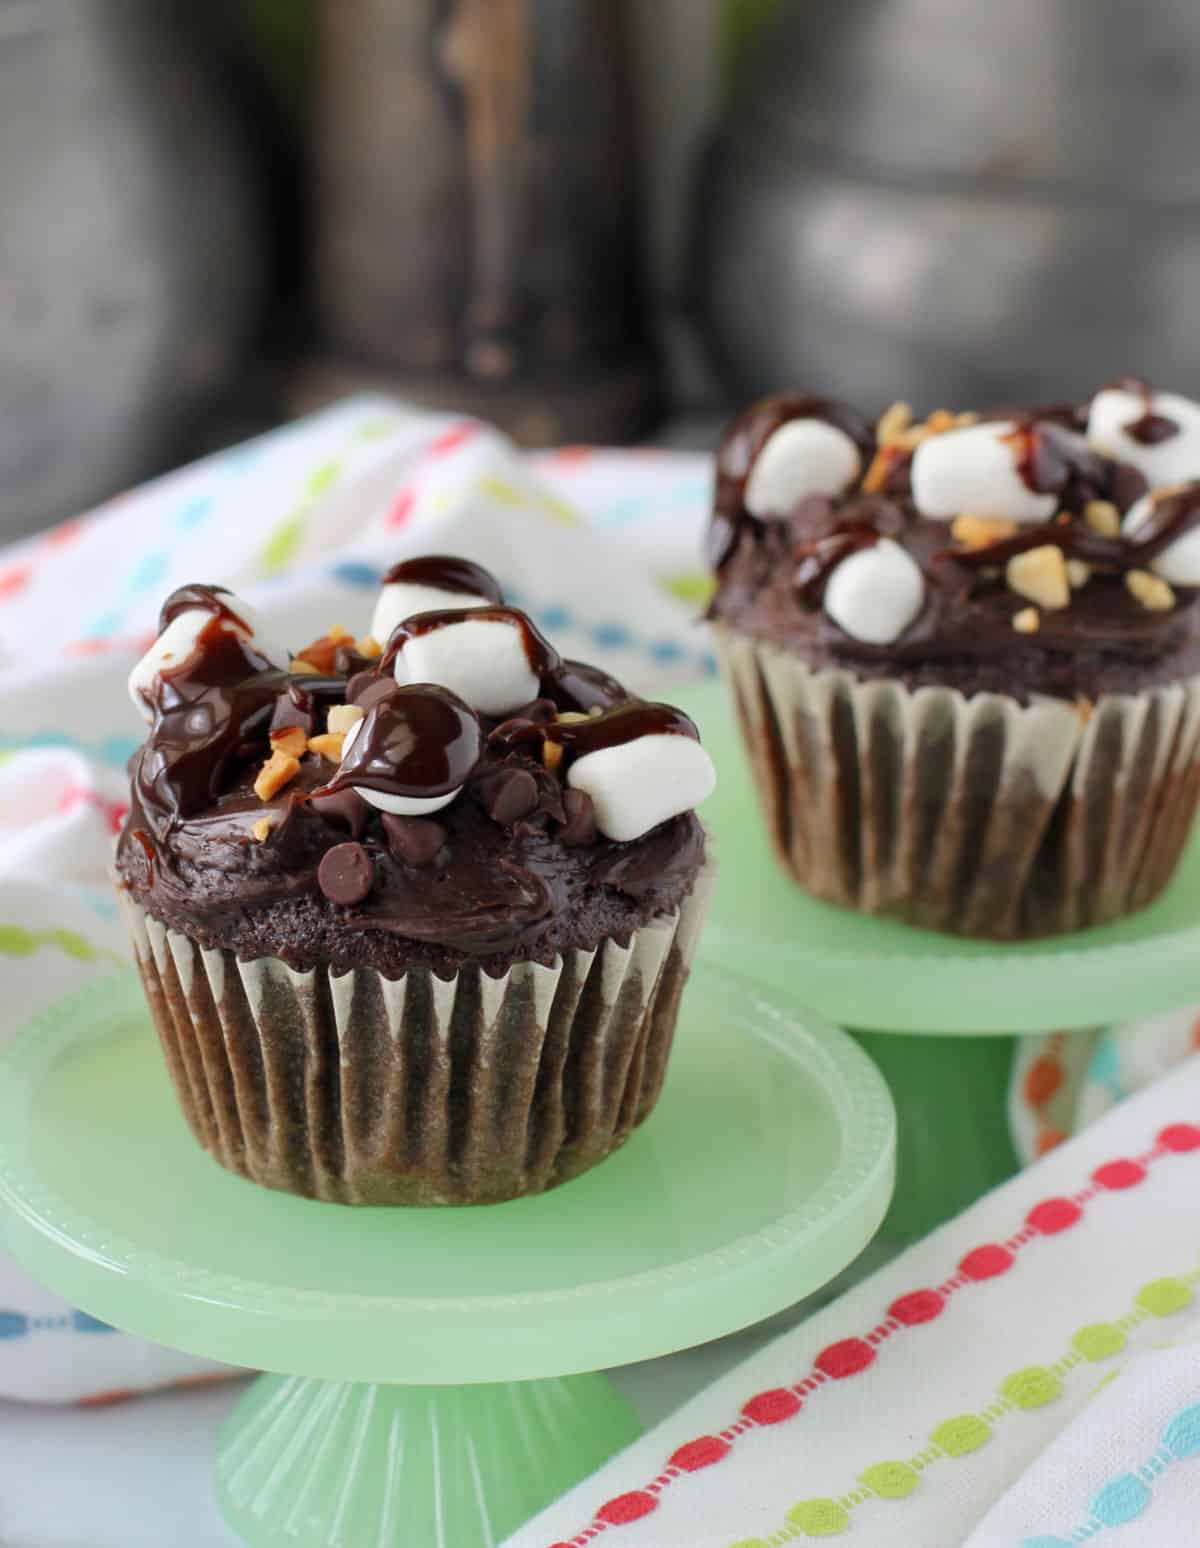 Two Rocky Road Cupcakes on green cupcake stands.